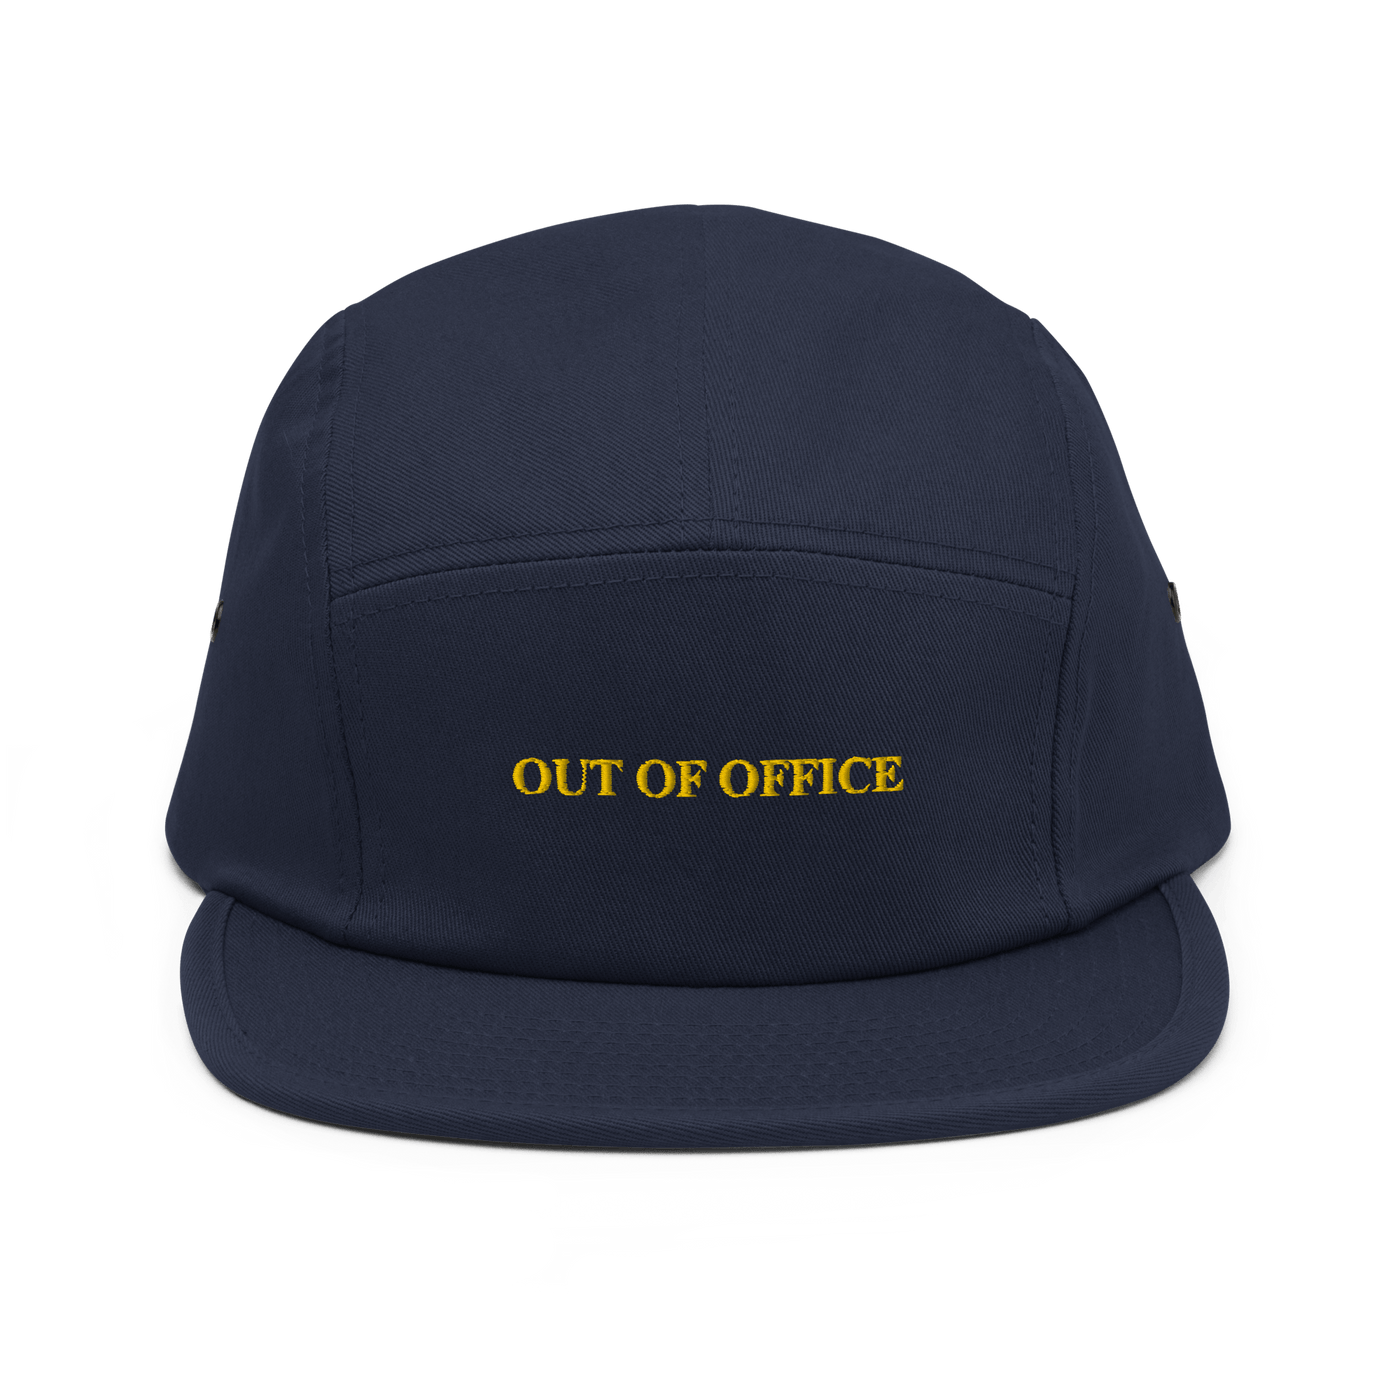 OUT OF OFFICE Five Panel Hat - Navy - - Just Another Cap Store